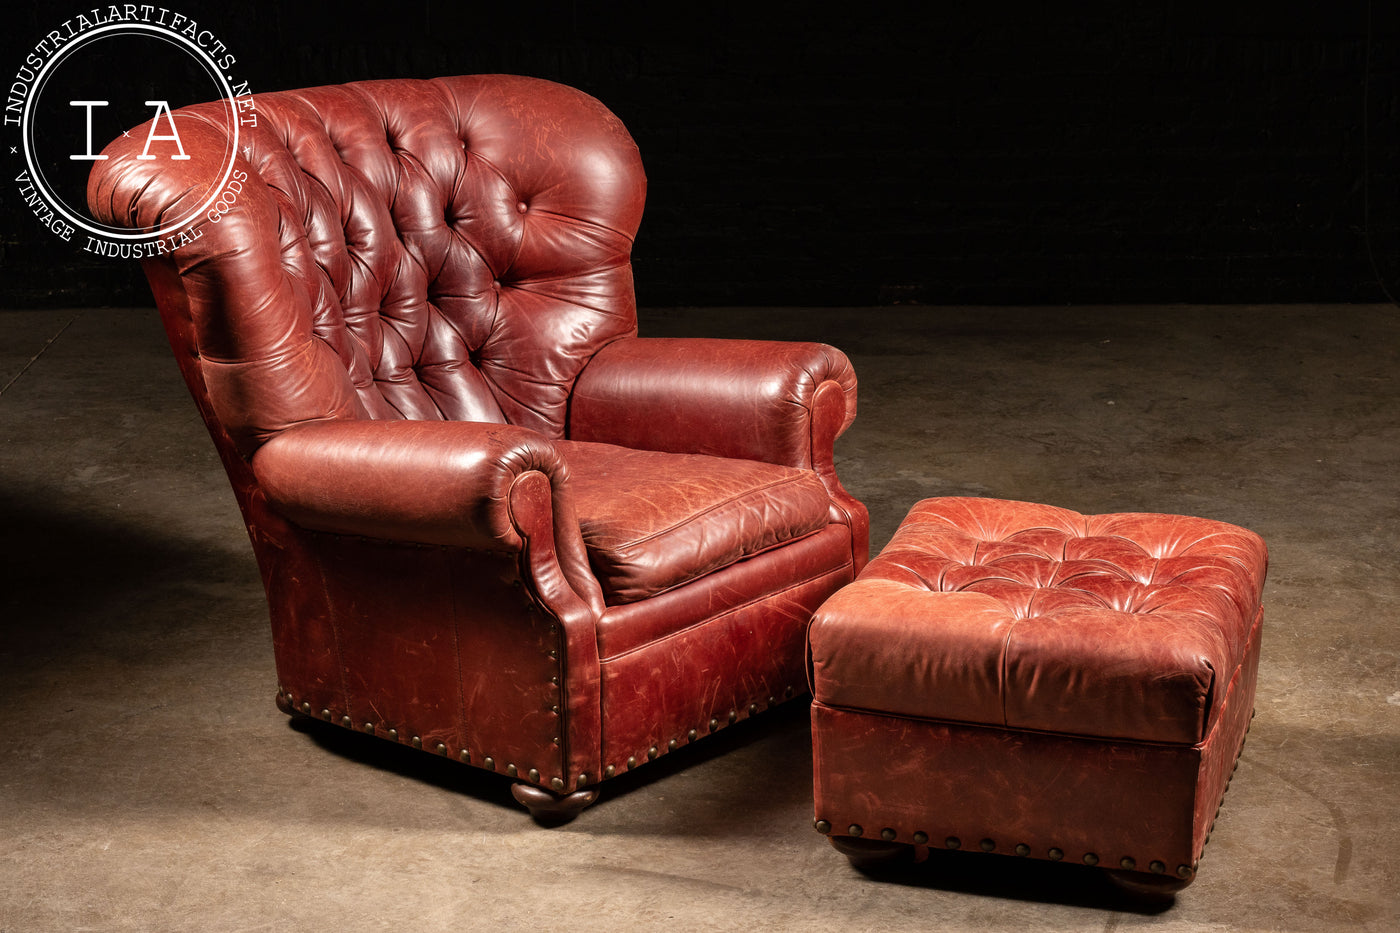 Vintage Tufted Full Grain Leather Chair and Ottoman in Red